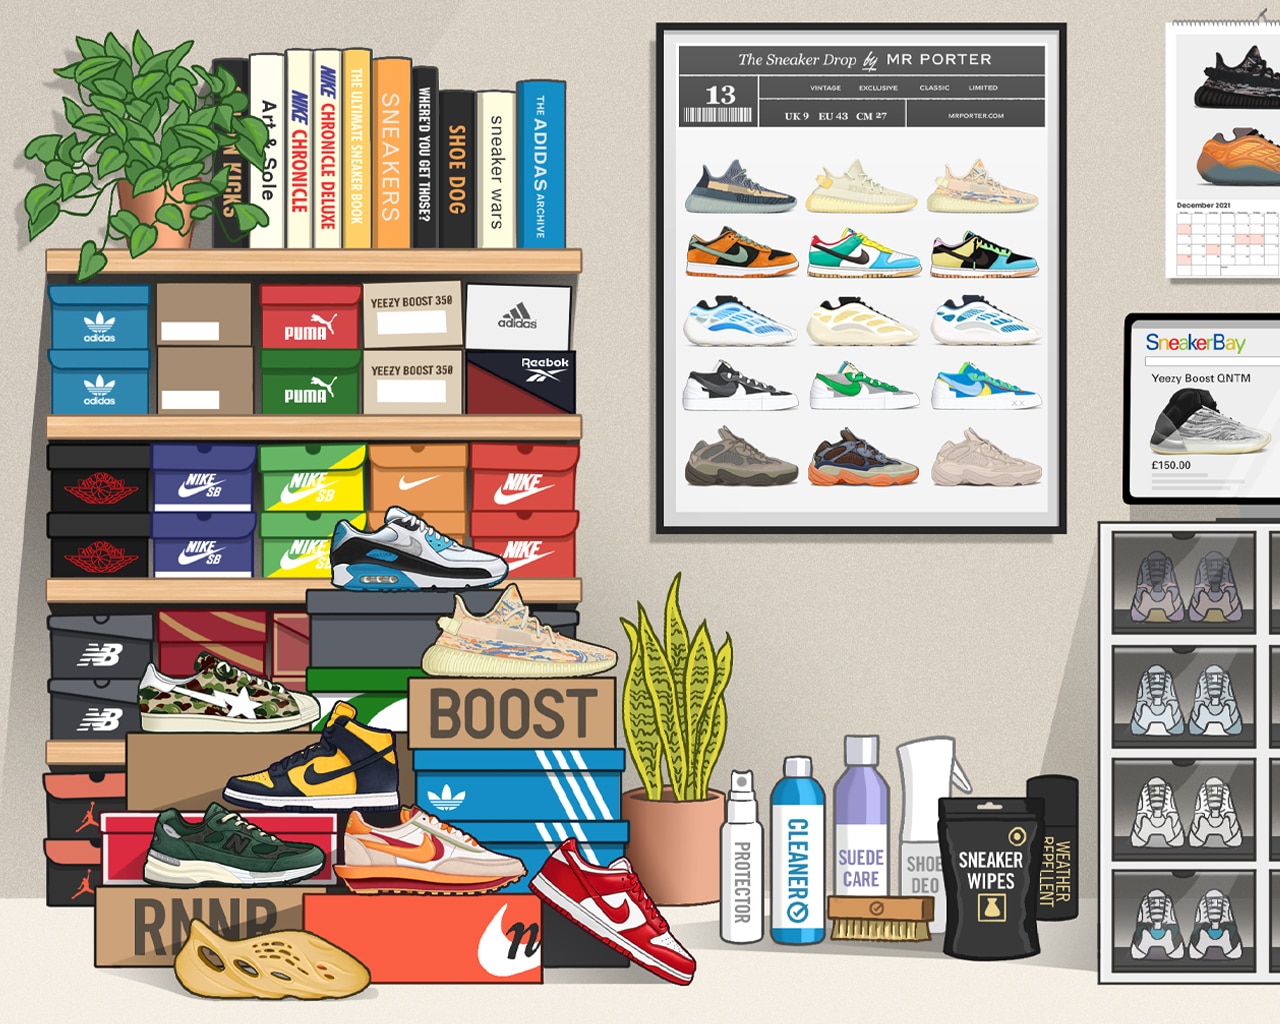 Ikepod steps into collectible sneakers